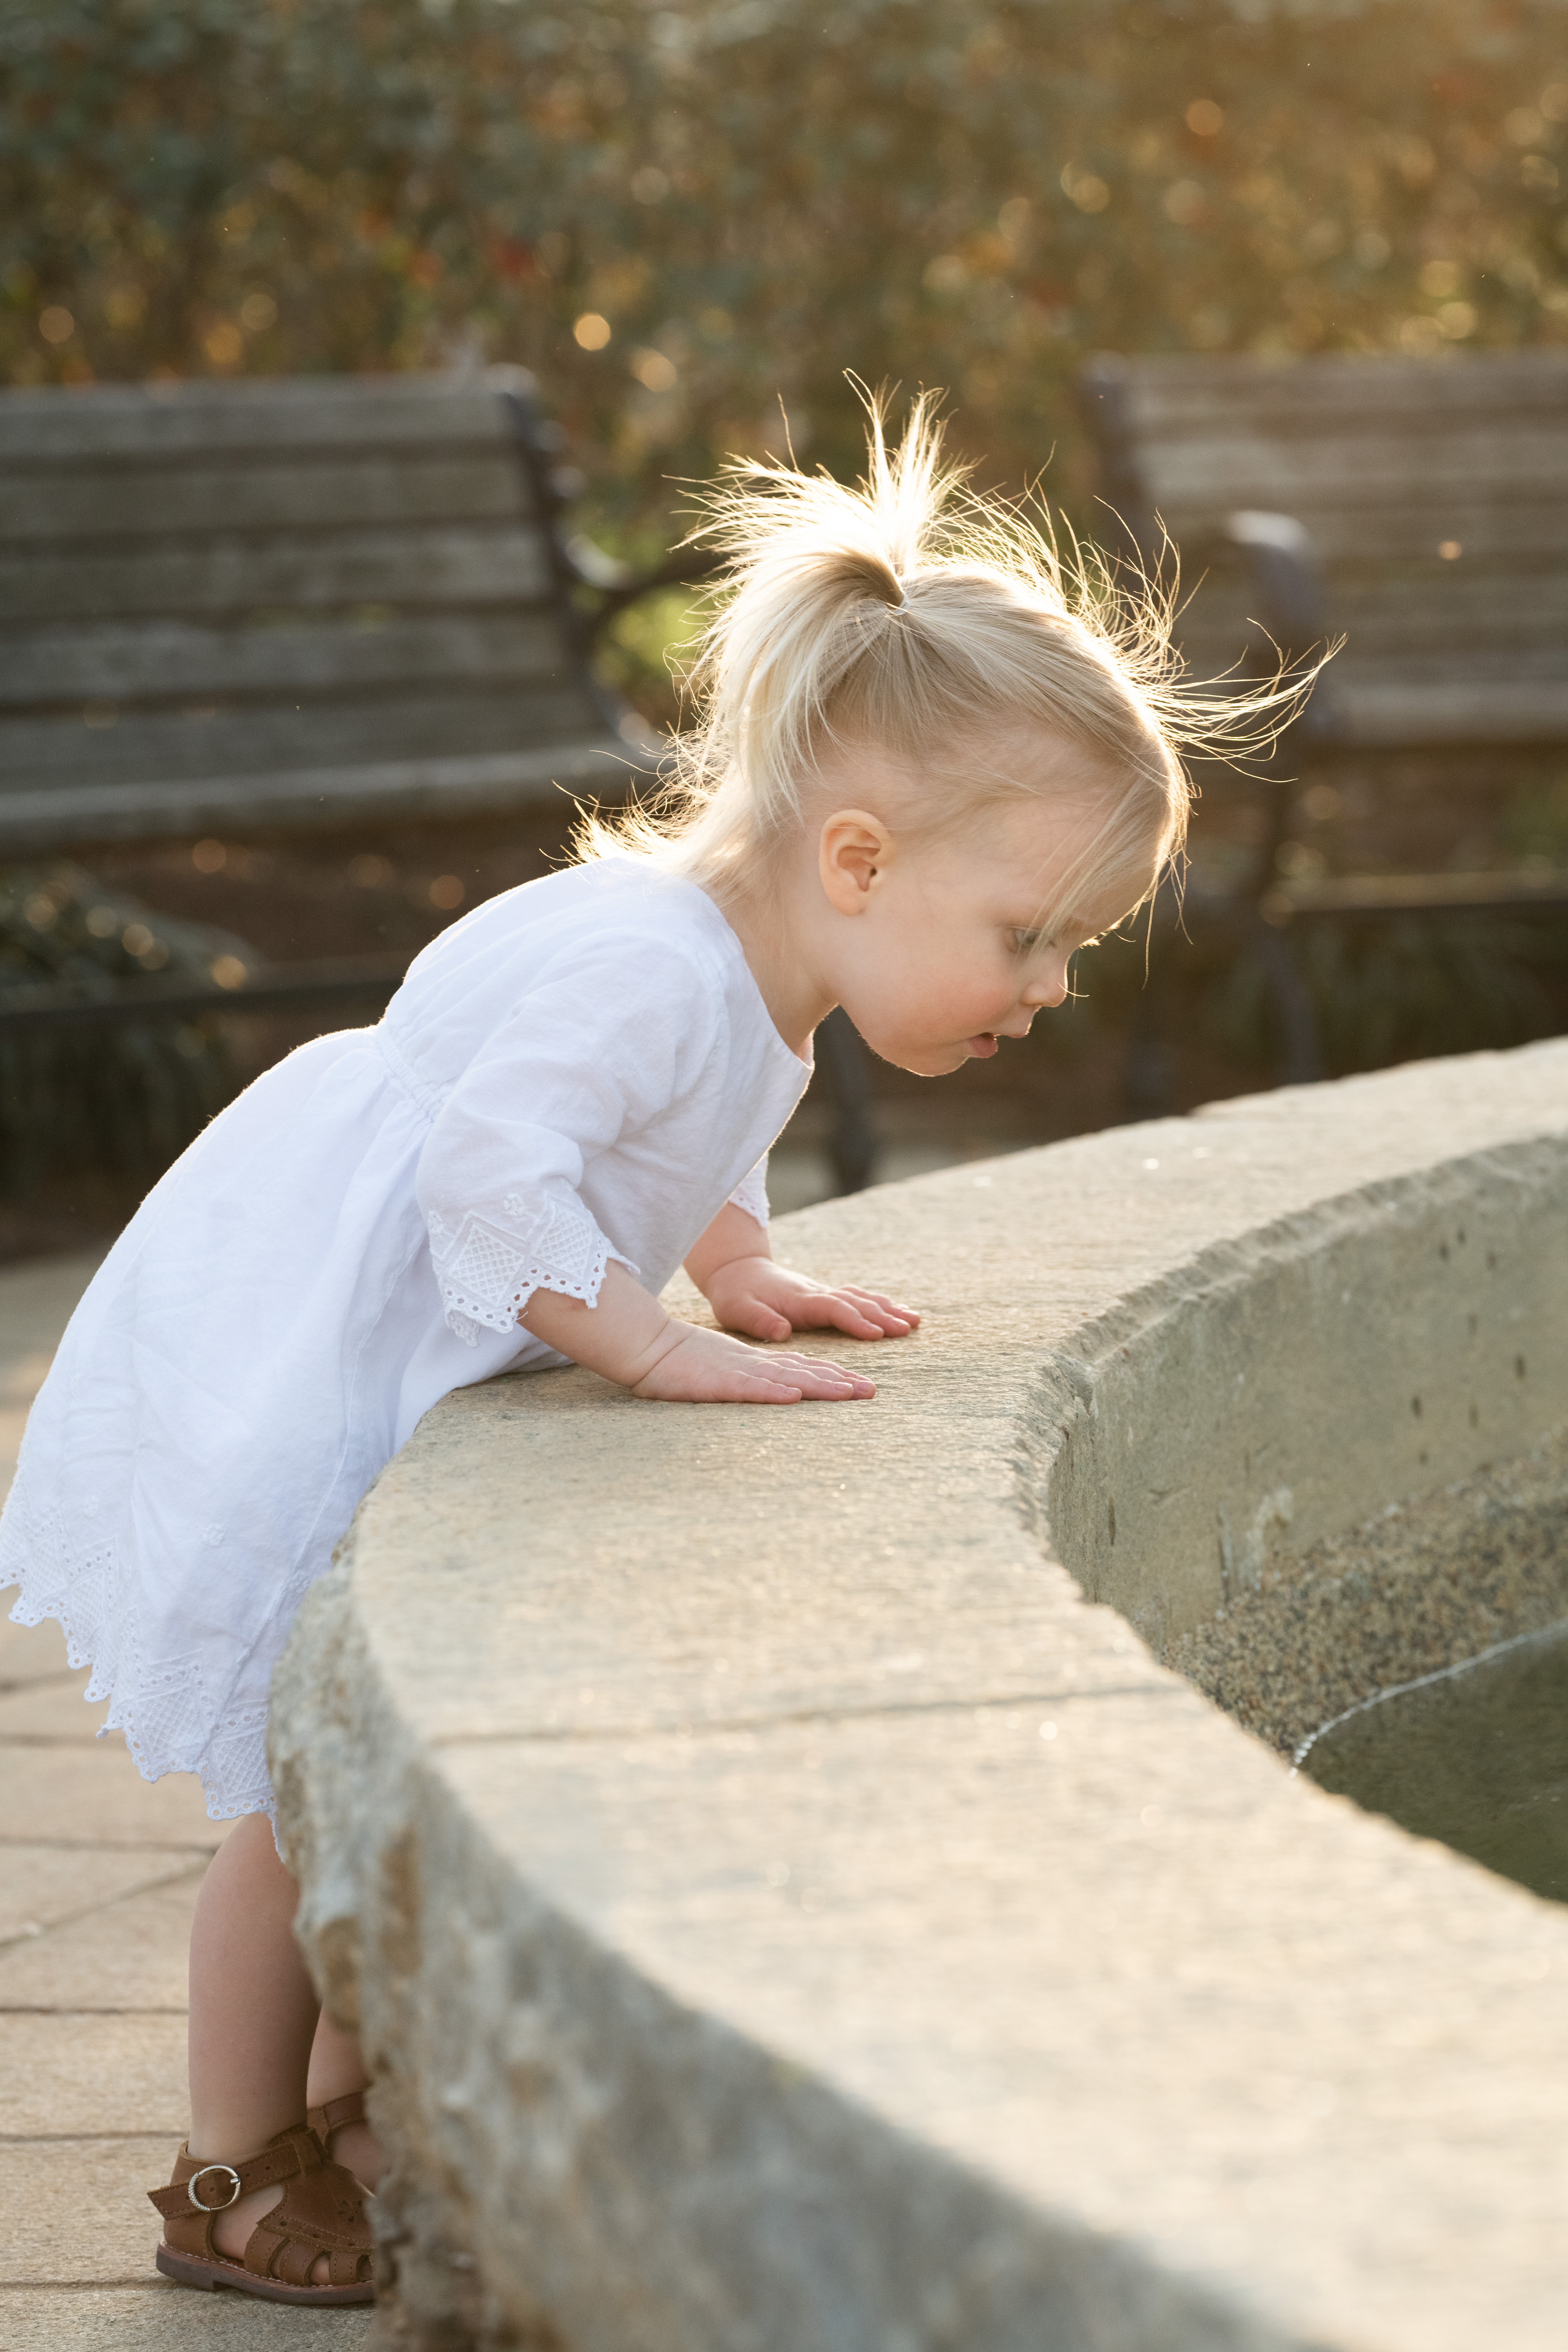 Toddler girl looking into a fountain at a park at sunset. The girl has blonde hair and is wearing a white dress with brown sandles.